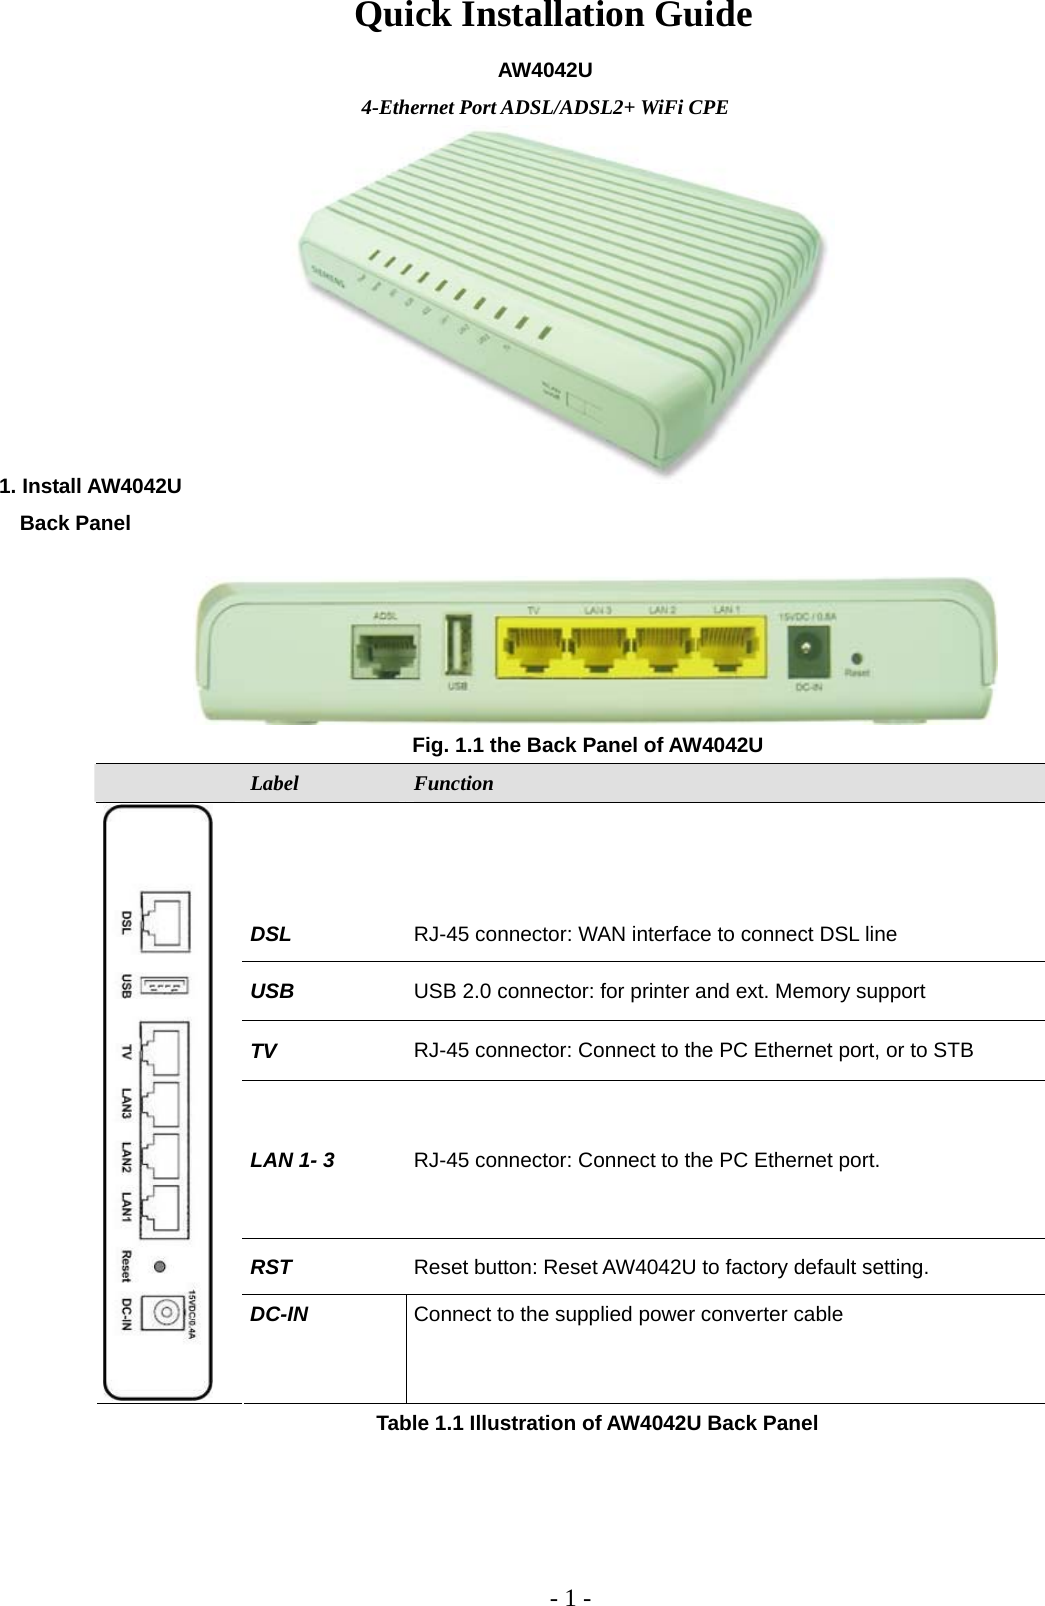  - 1 - Quick Installation Guide AW4042U 4-Ethernet Port ADSL/ADSL2+ WiFi CPE          1. Install AW4042U   Back Panel   Fig. 1.1 the Back Panel of AW4042U  Label  Function    DSL    RJ-45 connector: WAN interface to connect DSL line USB  USB 2.0 connector: for printer and ext. Memory support TV  RJ-45 connector: Connect to the PC Ethernet port, or to STB LAN 1- 3  RJ-45 connector: Connect to the PC Ethernet port. RST  Reset button: Reset AW4042U to factory default setting.  DC-IN  Connect to the supplied power converter cable Table 1.1 Illustration of AW4042U Back Panel    